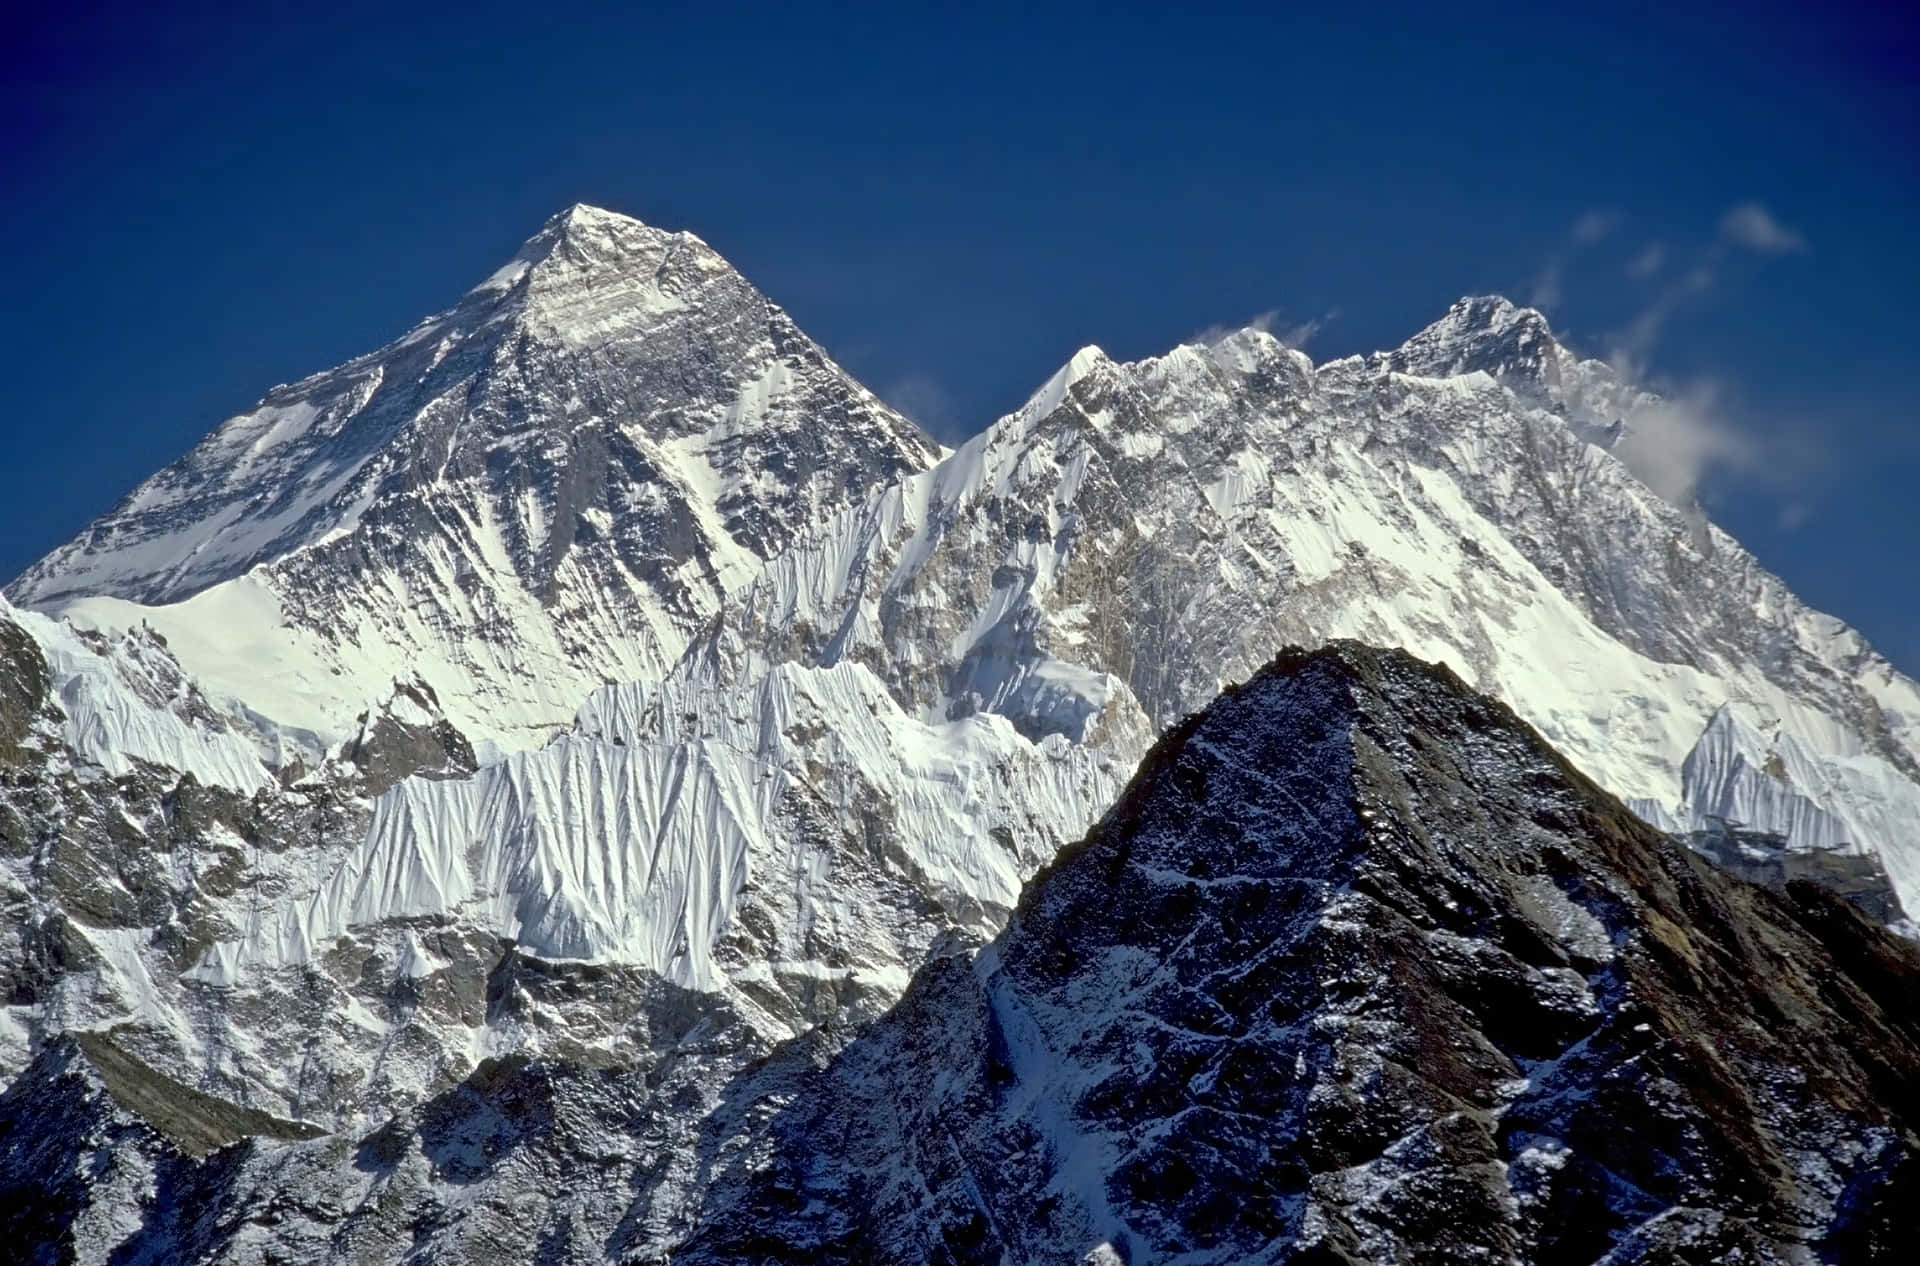 “Explore the peaks of Mount Everest, the highest mountain in the world.”